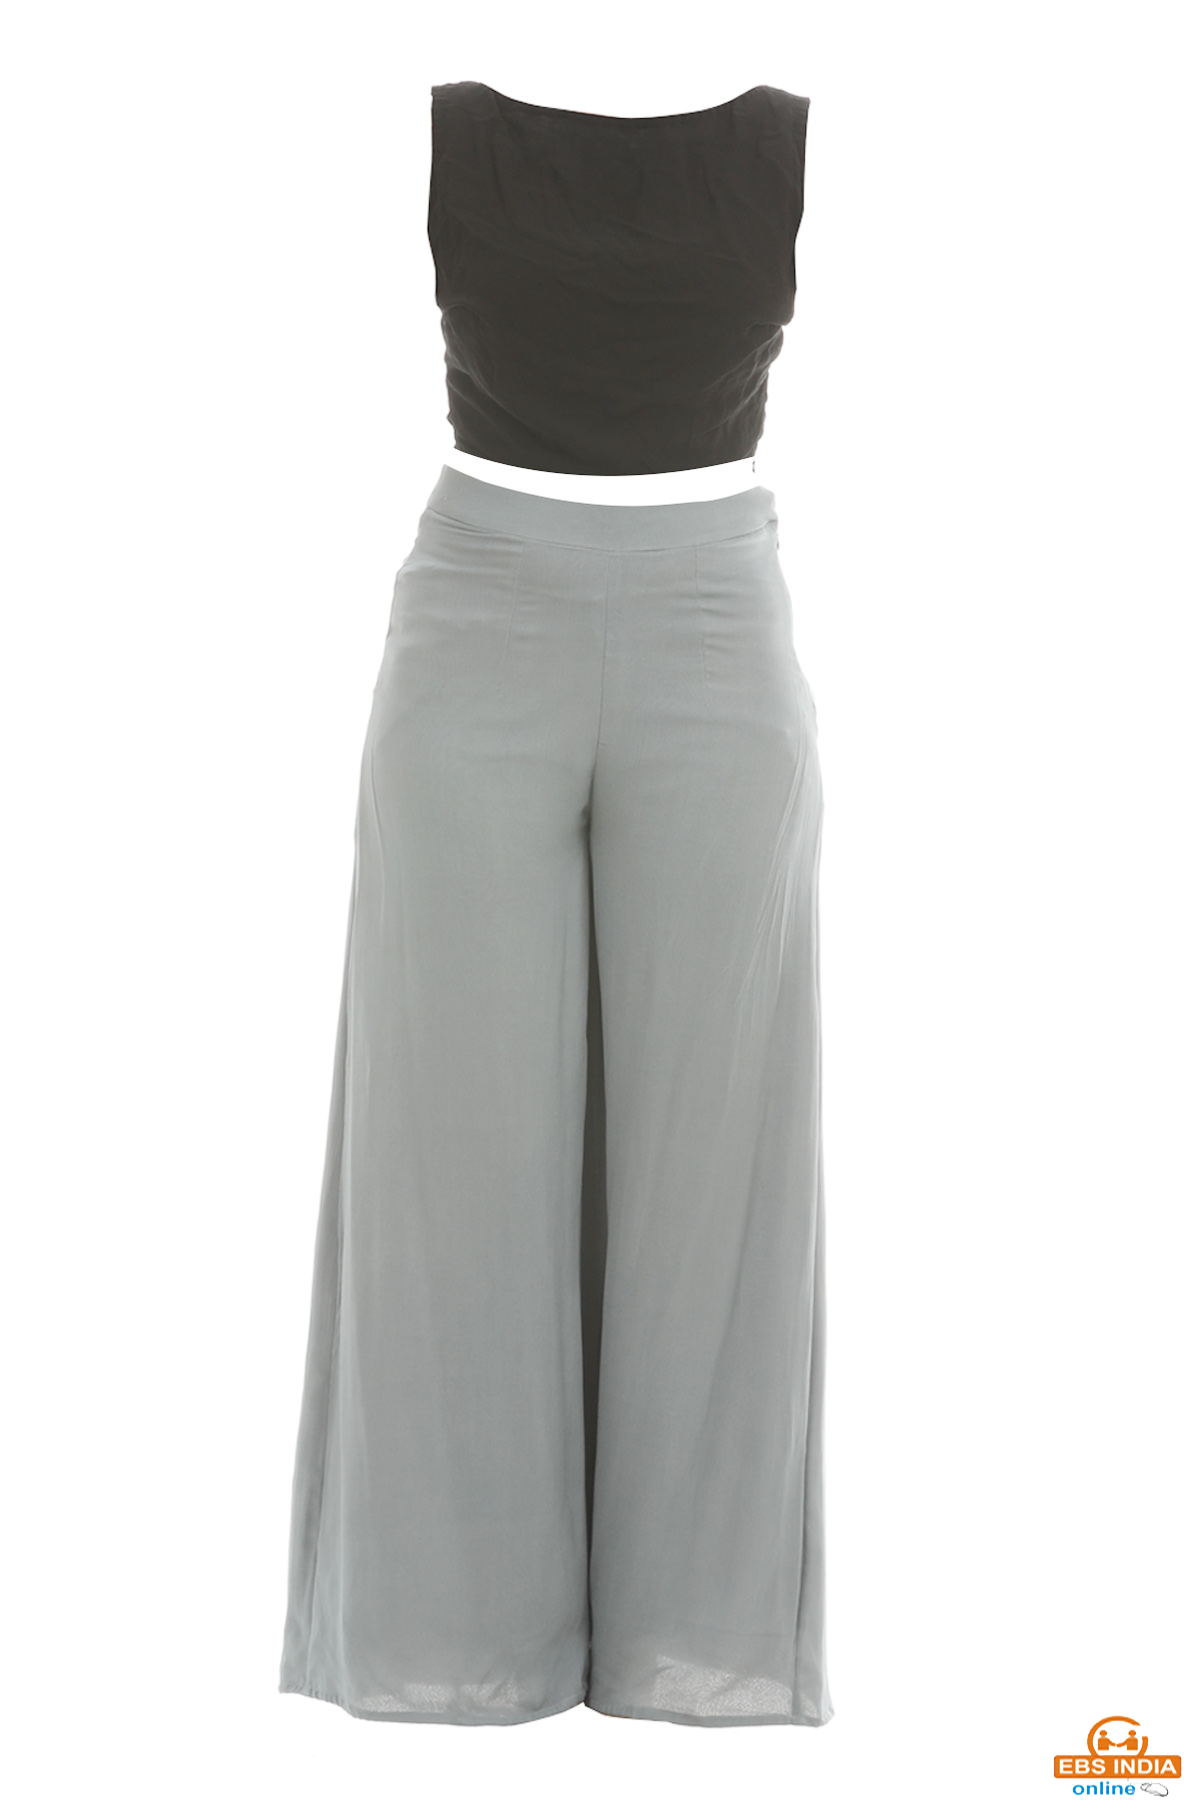 Now Get Fashionable & Trendy Pants From TheHLabel: Shop Now!